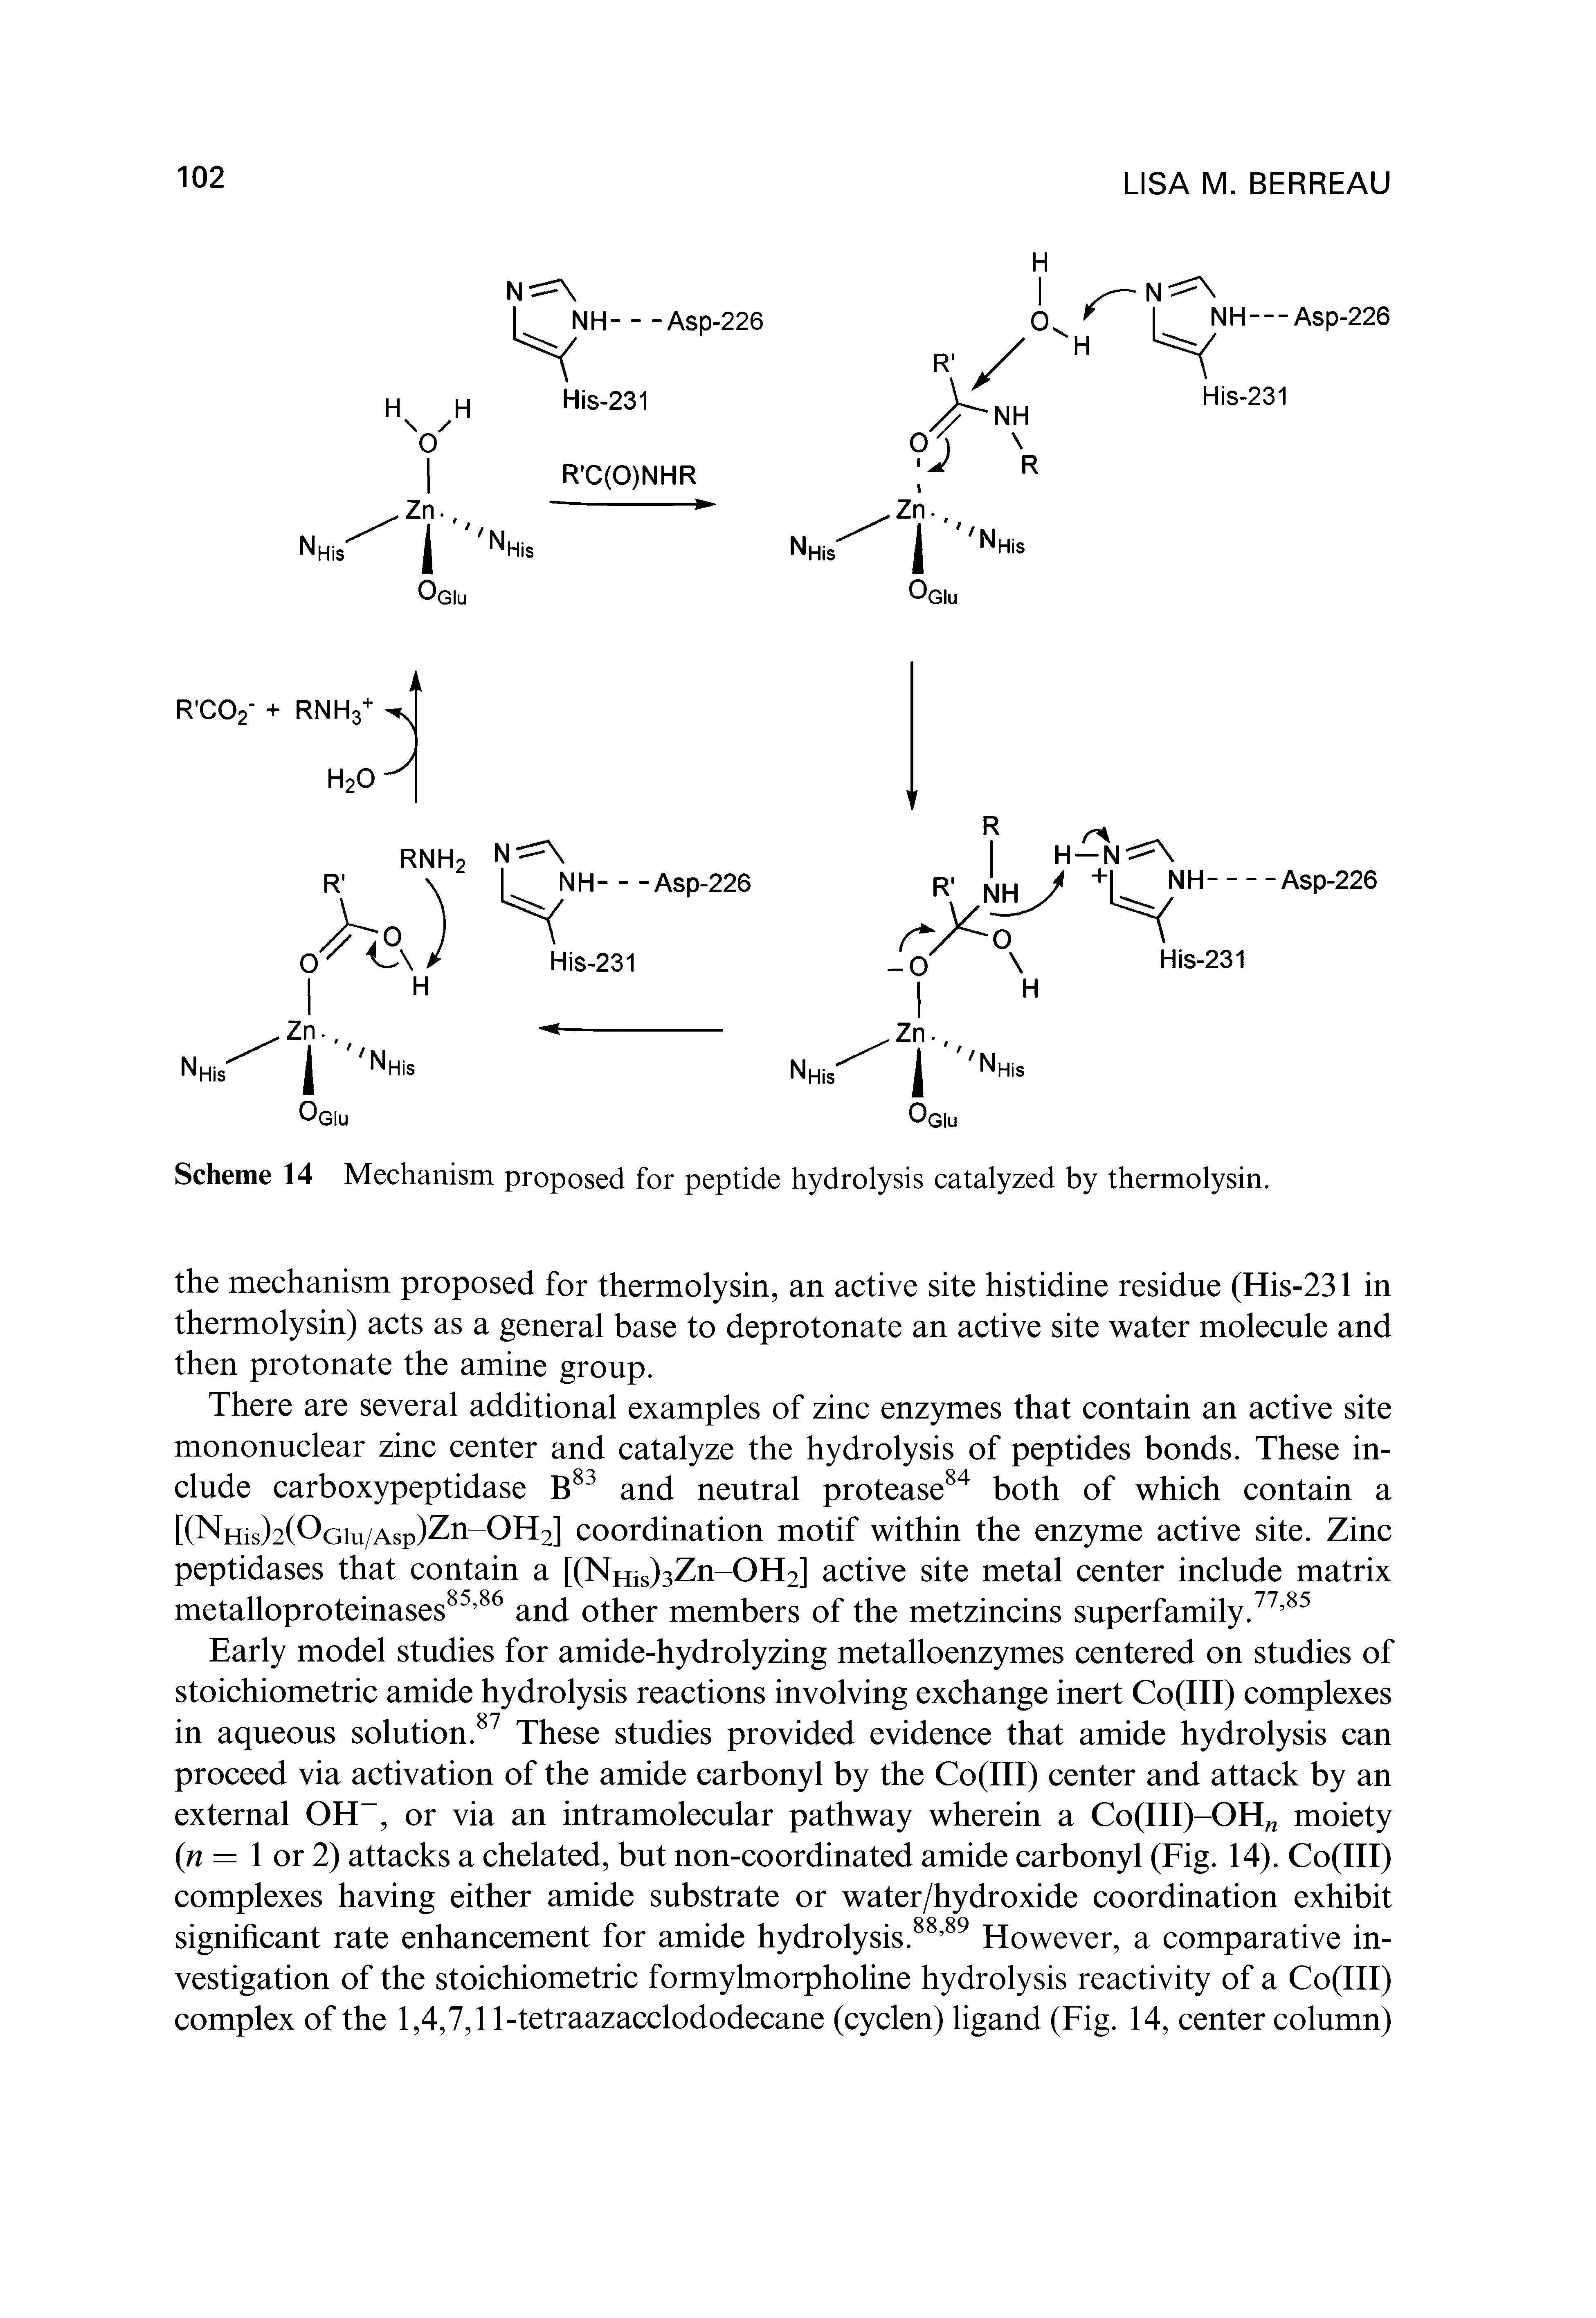 Scheme 14 Mechanism proposed for peptide hydrolysis catalyzed by thermolysin.